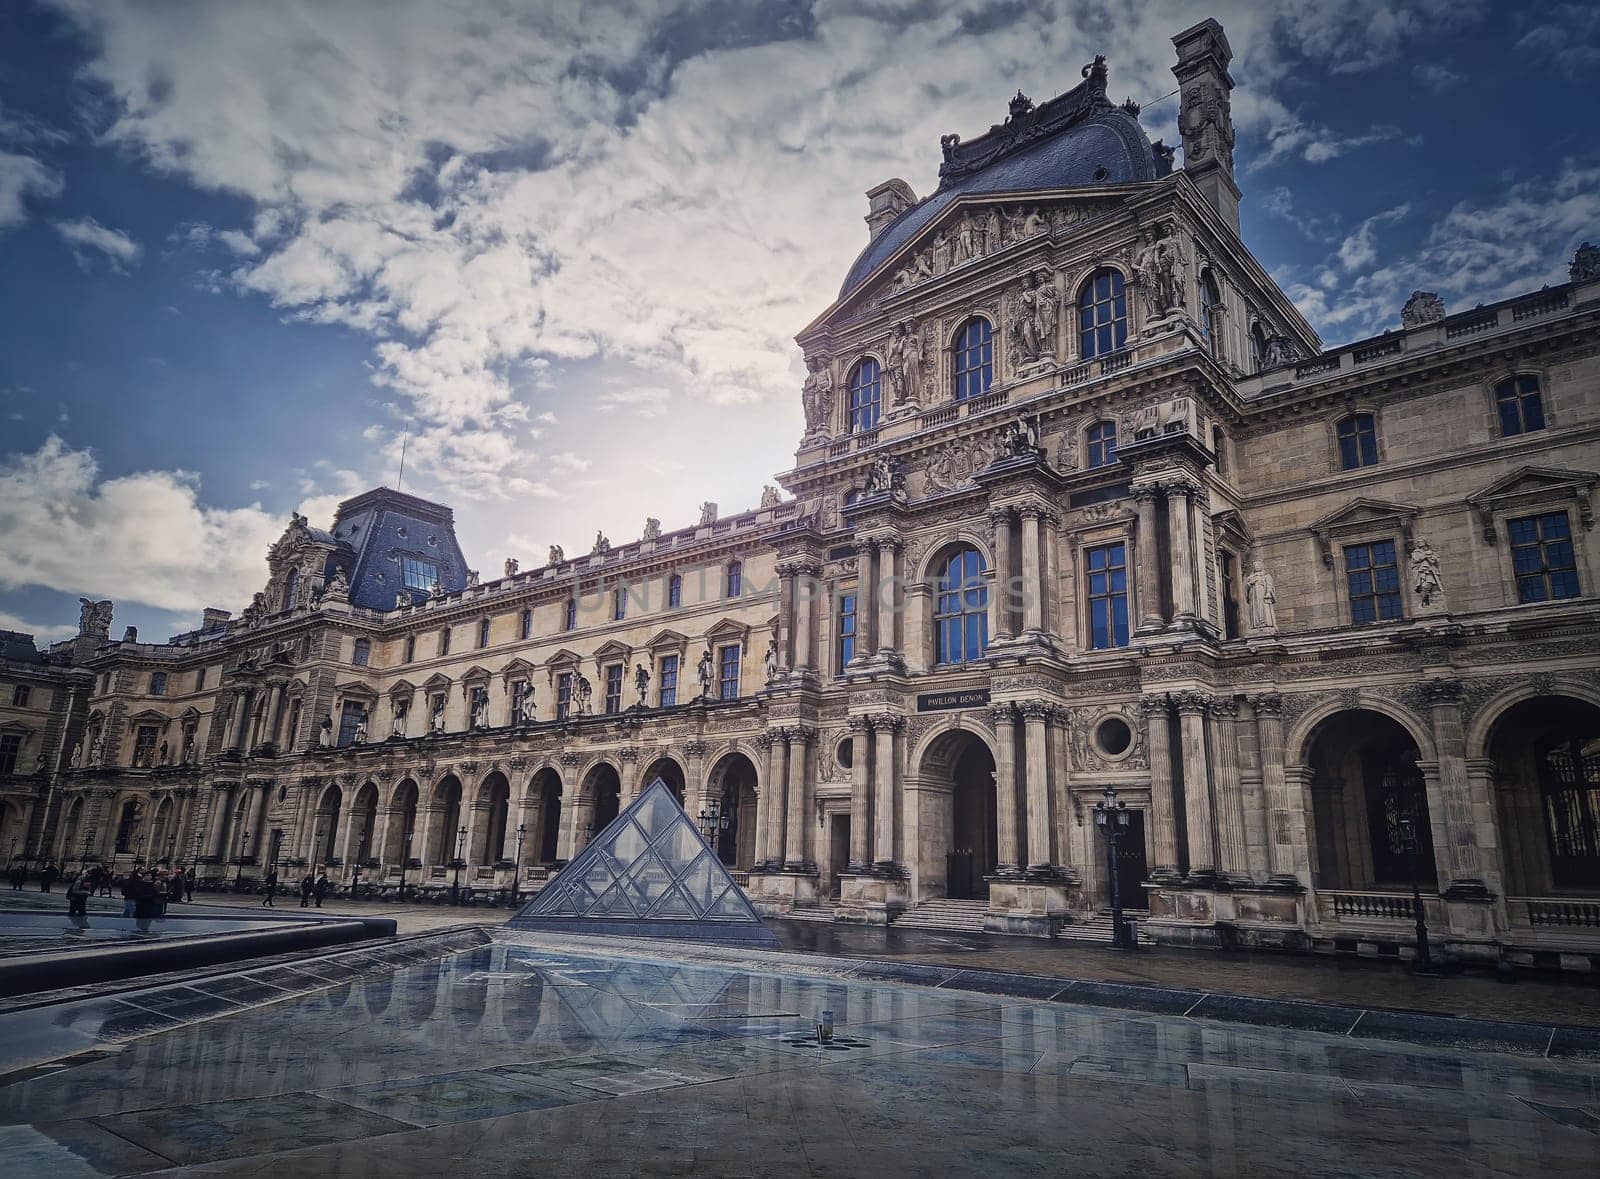 Outdoors view to the Louvre Museum in Paris, France. The historical palace building